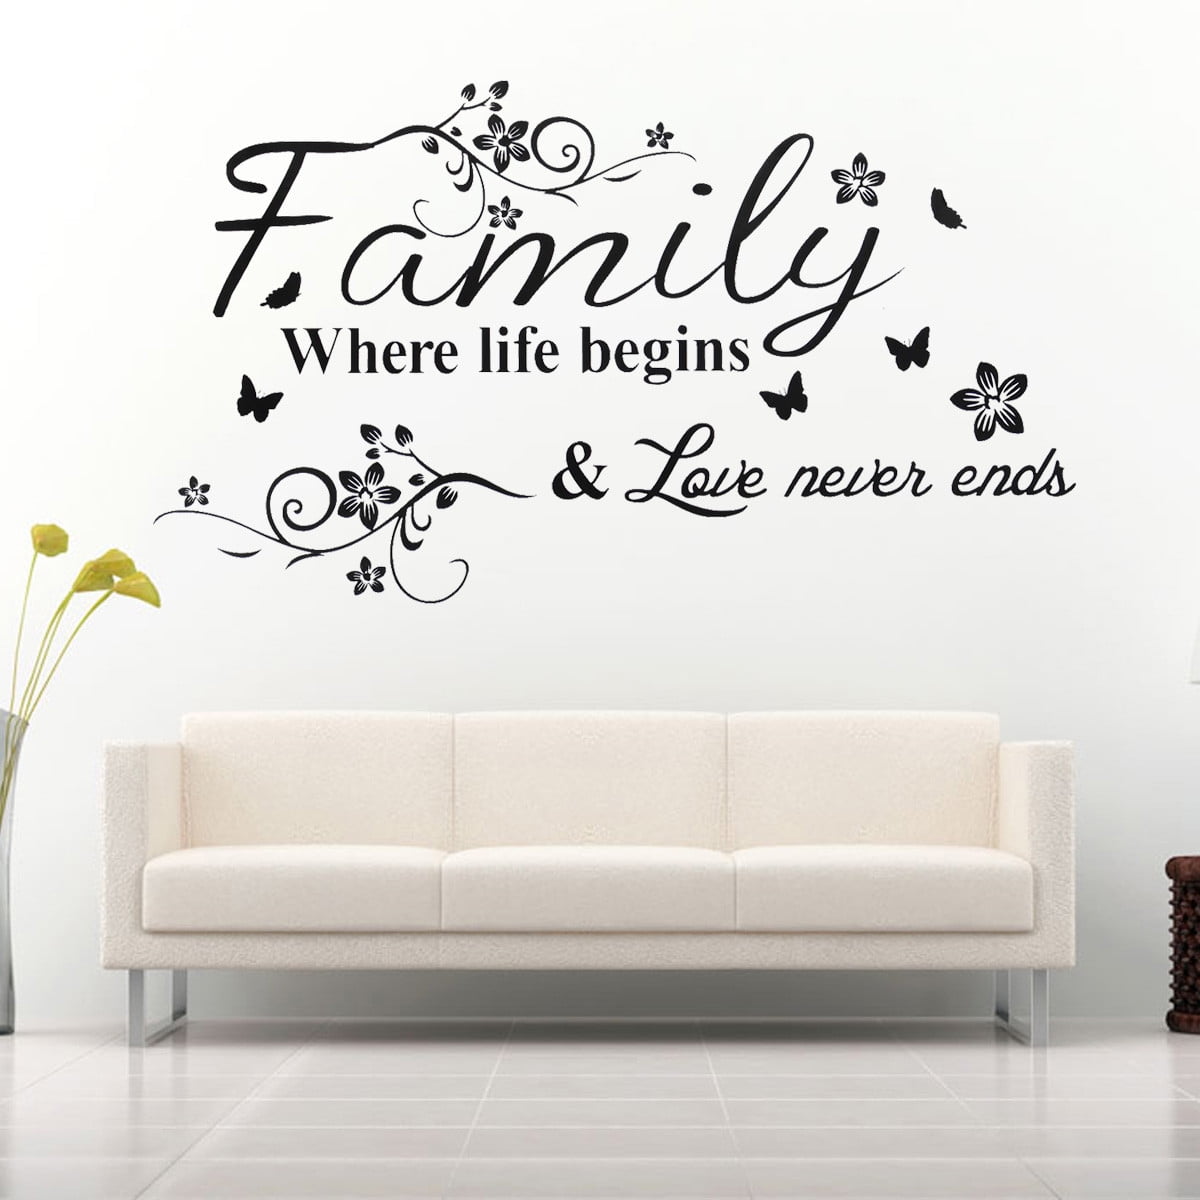 Bless This Home Wall Sticker Family Quote Wall Decal Bedroom Decoration G 